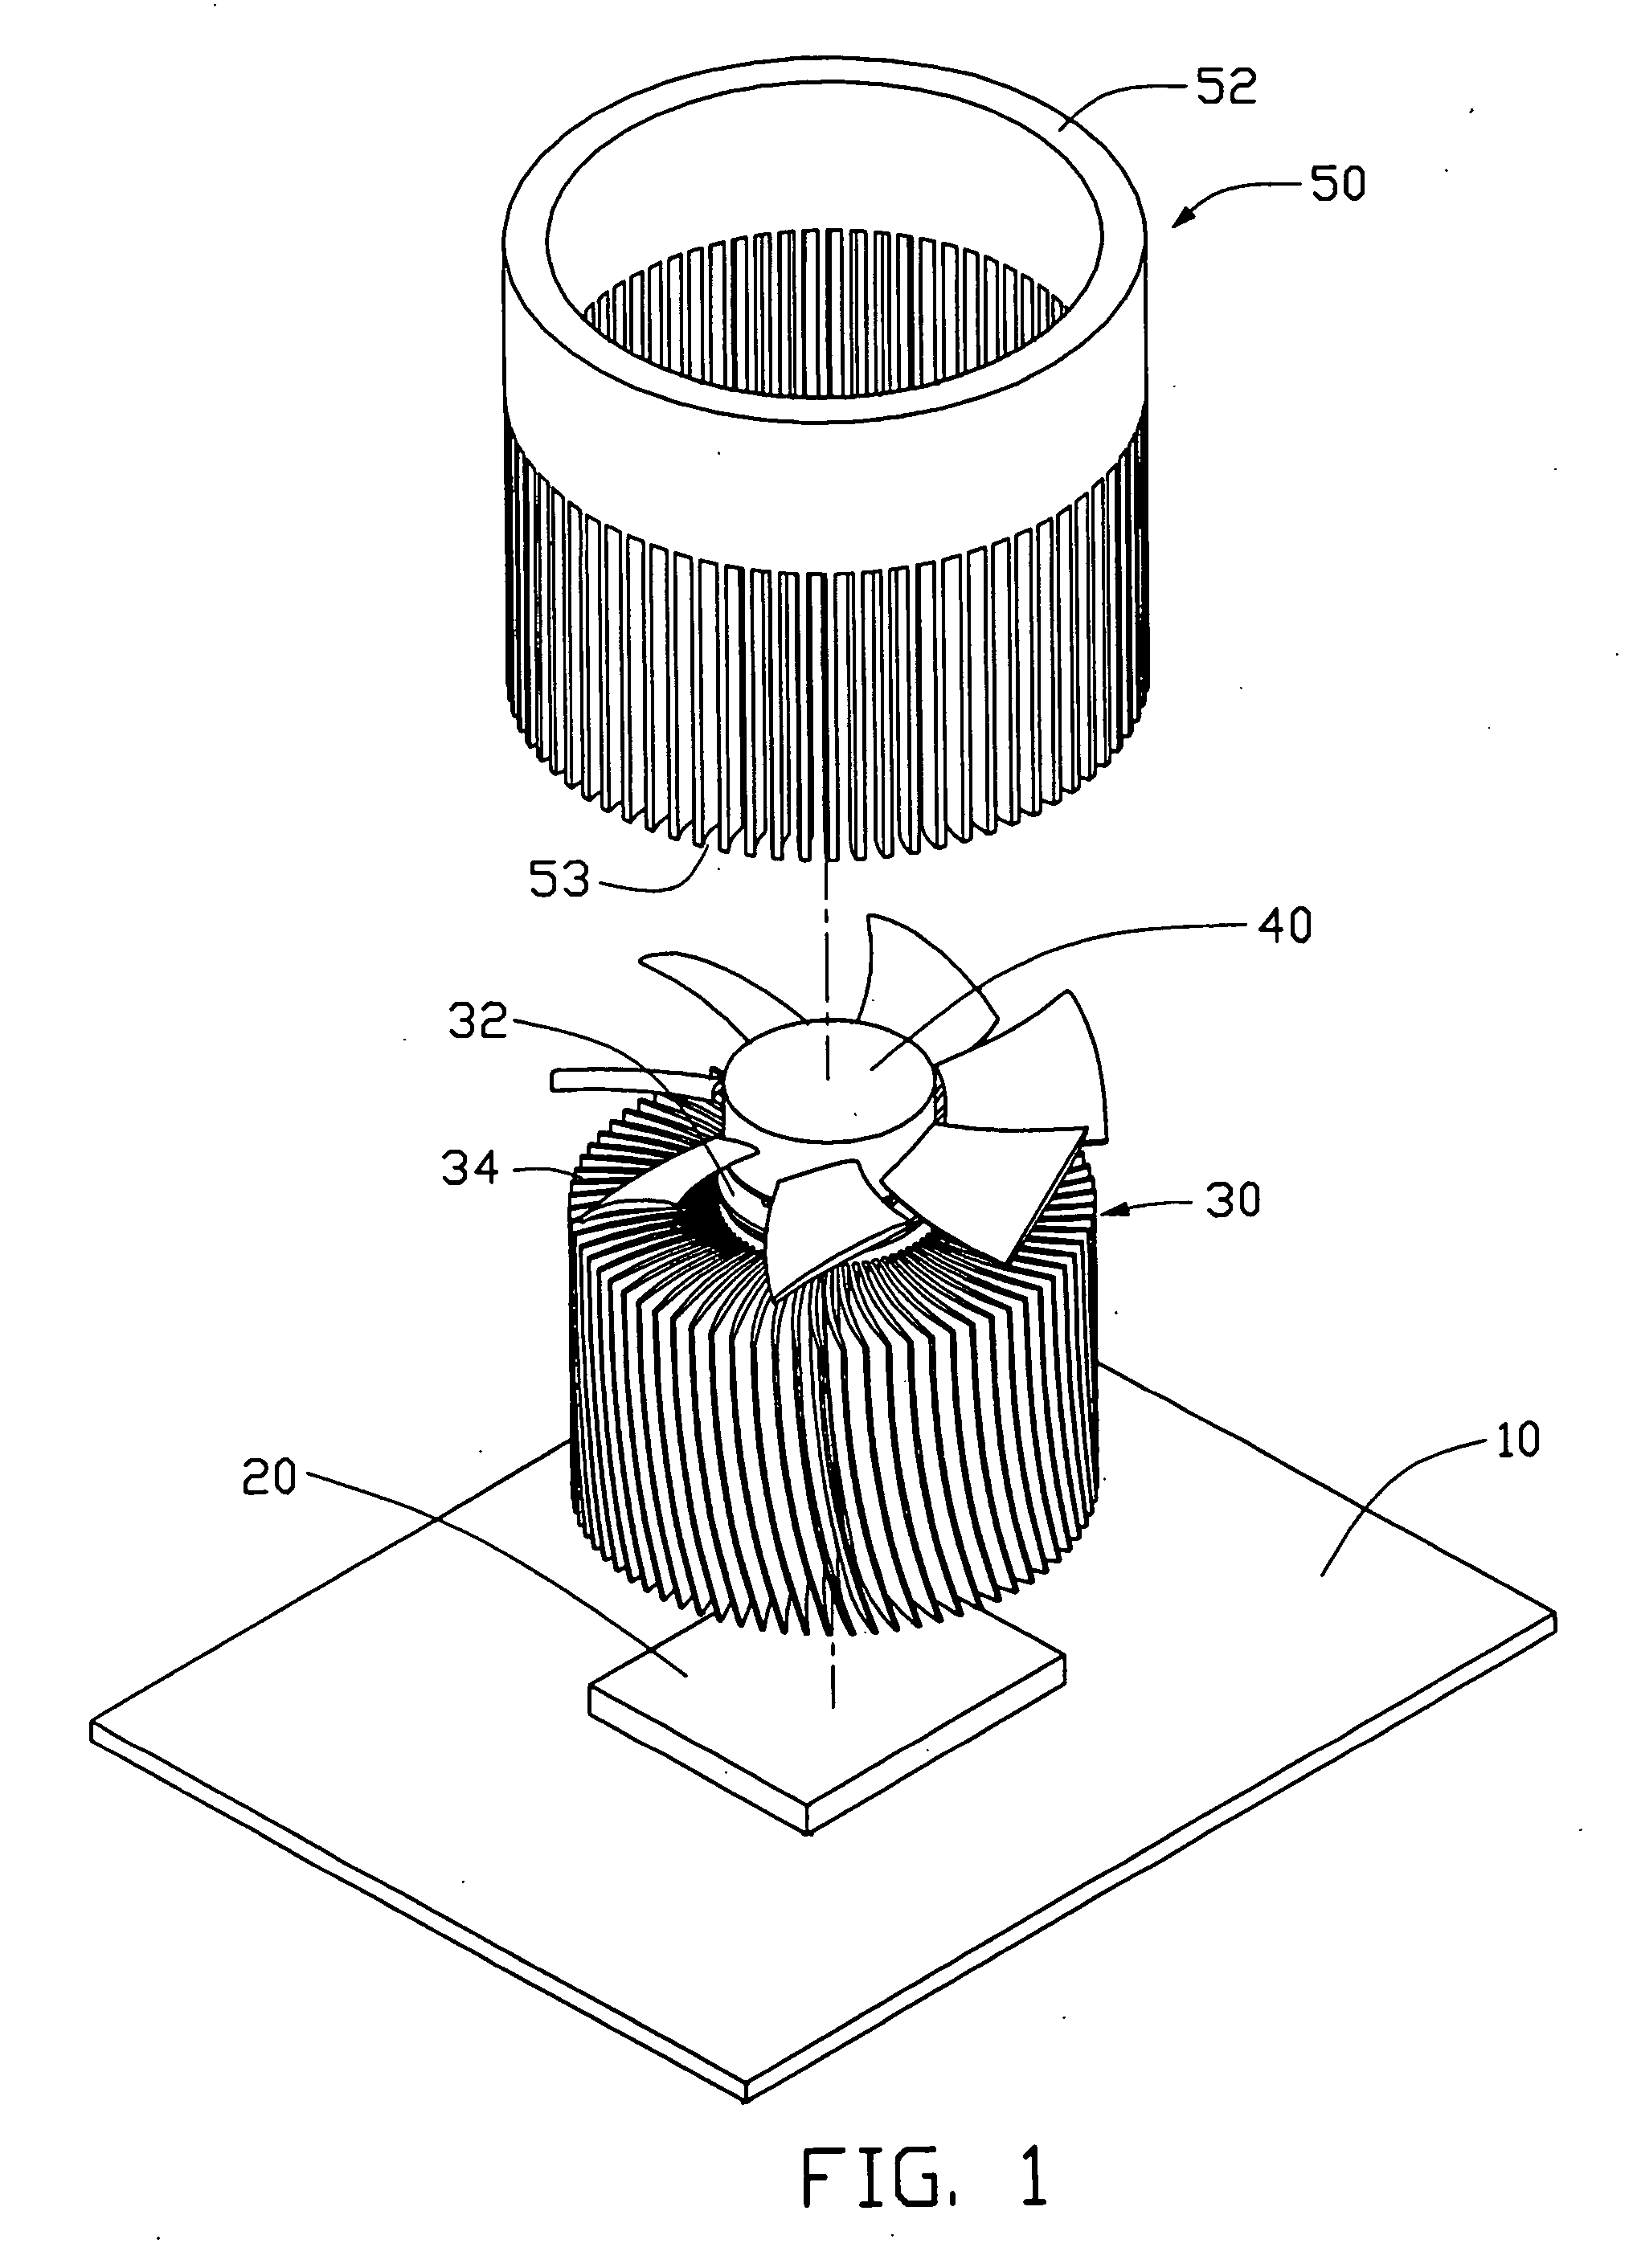 Heat dissipation device assembly with fan cover